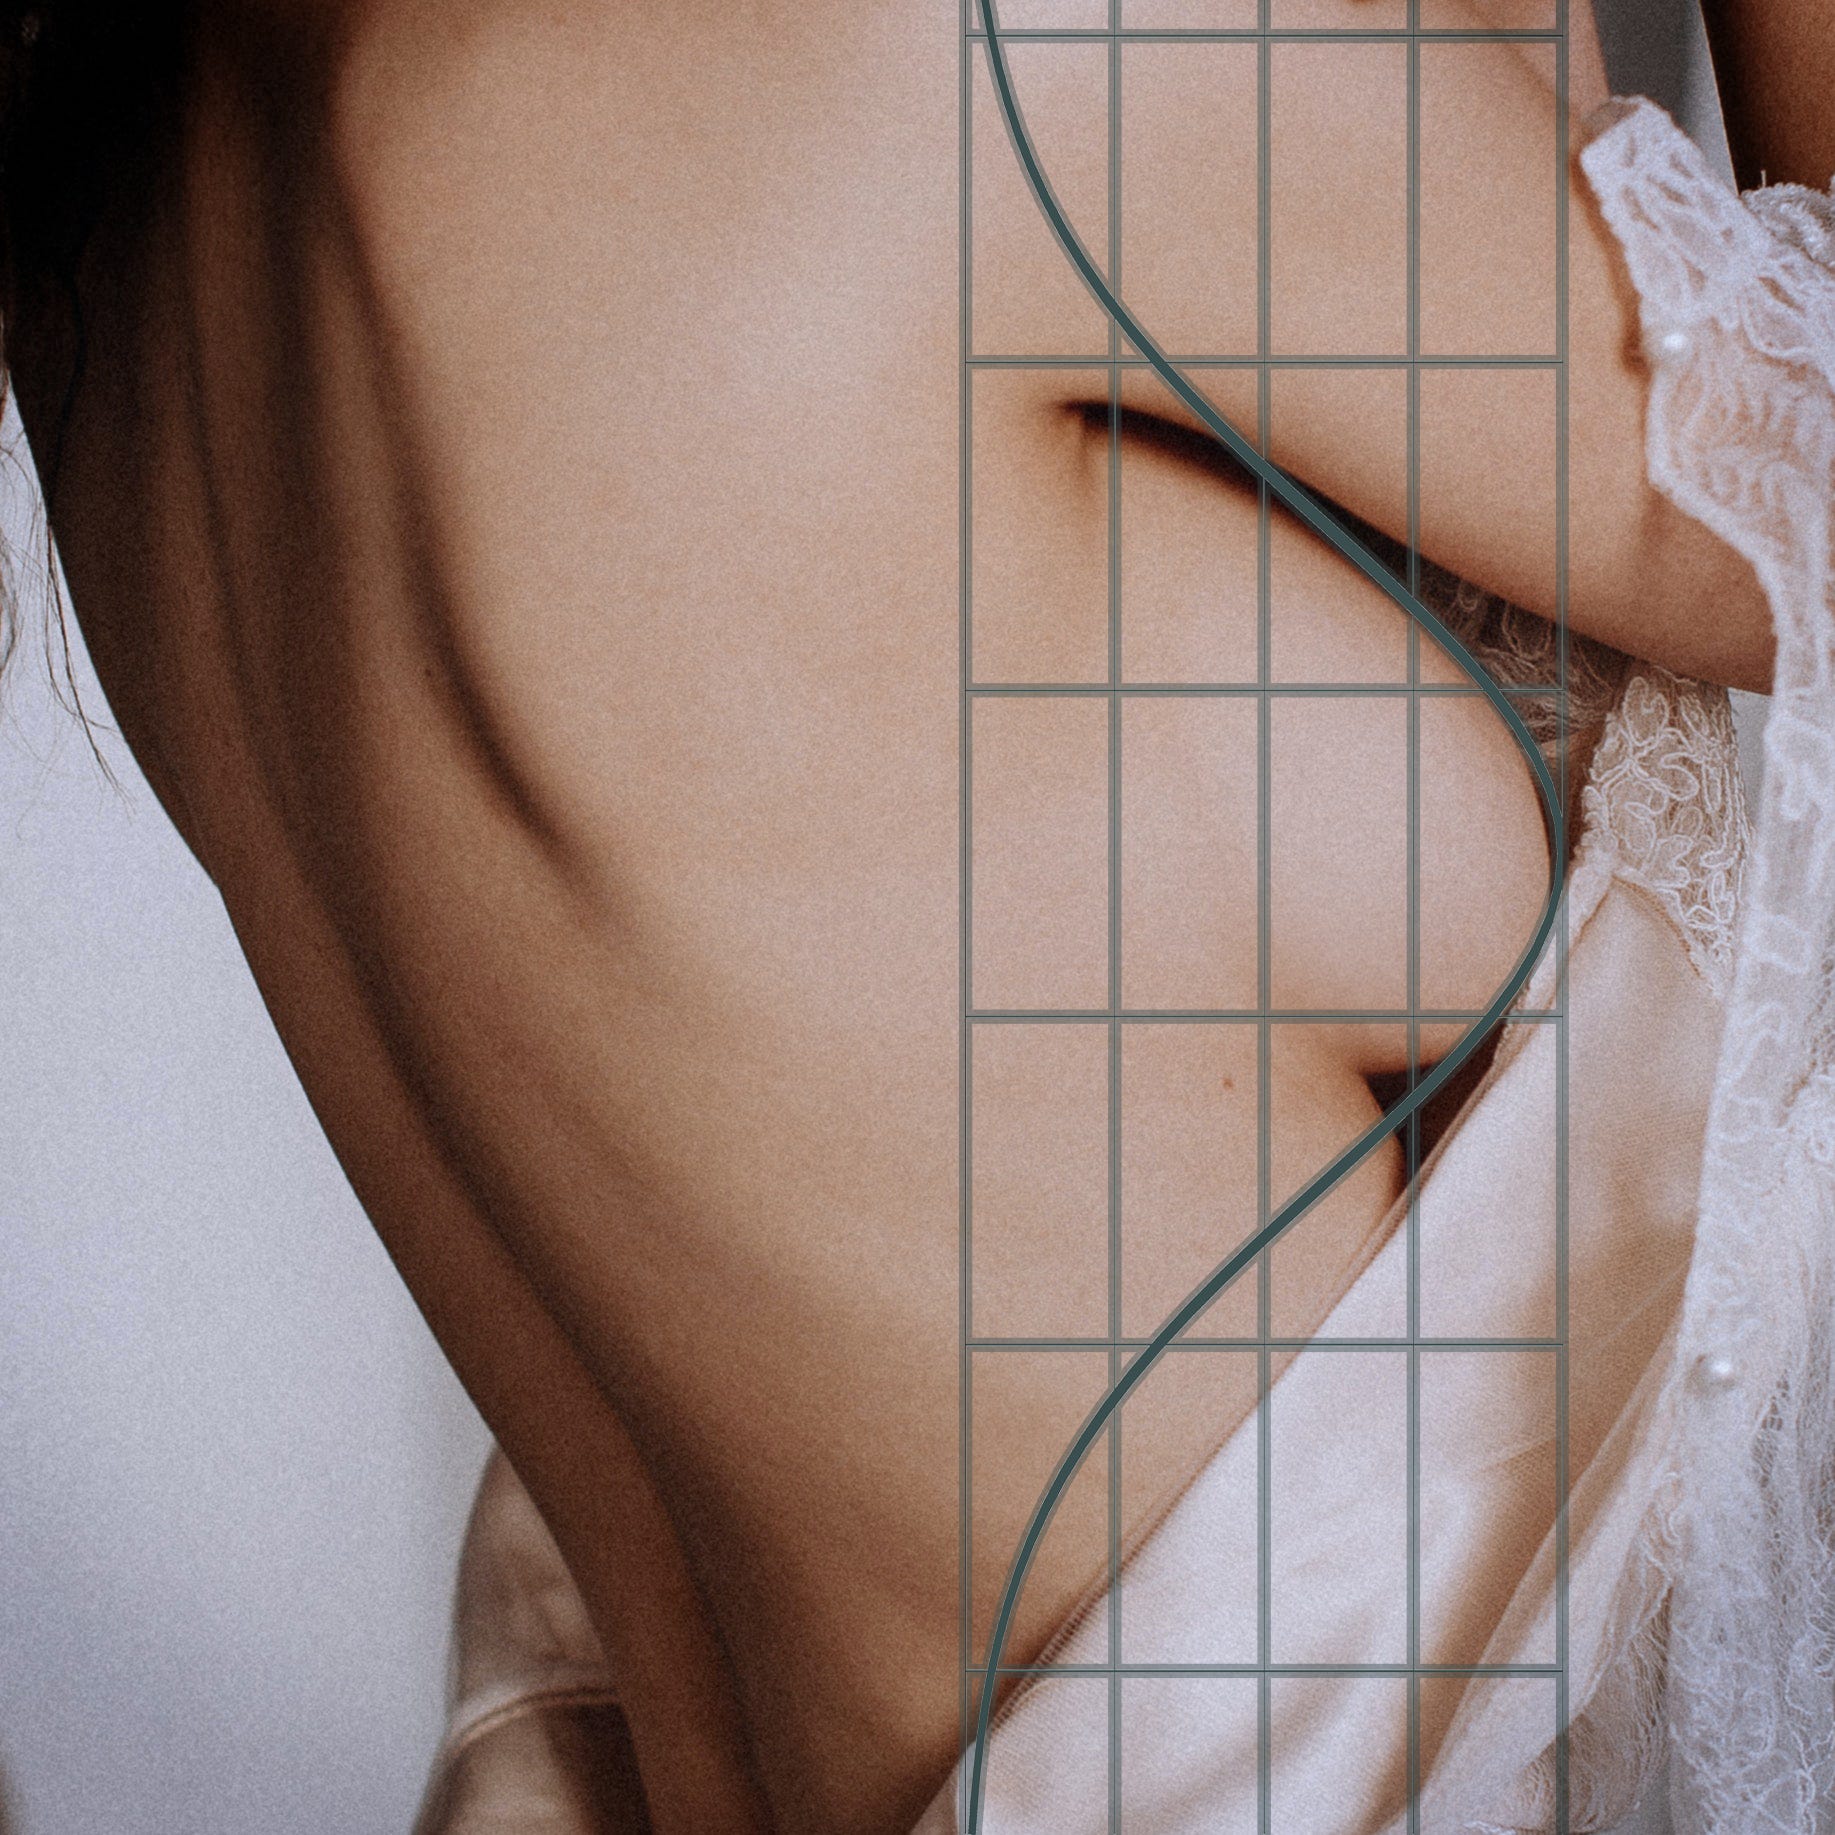 Medium-Sized Breasts and Gaussian Distributions